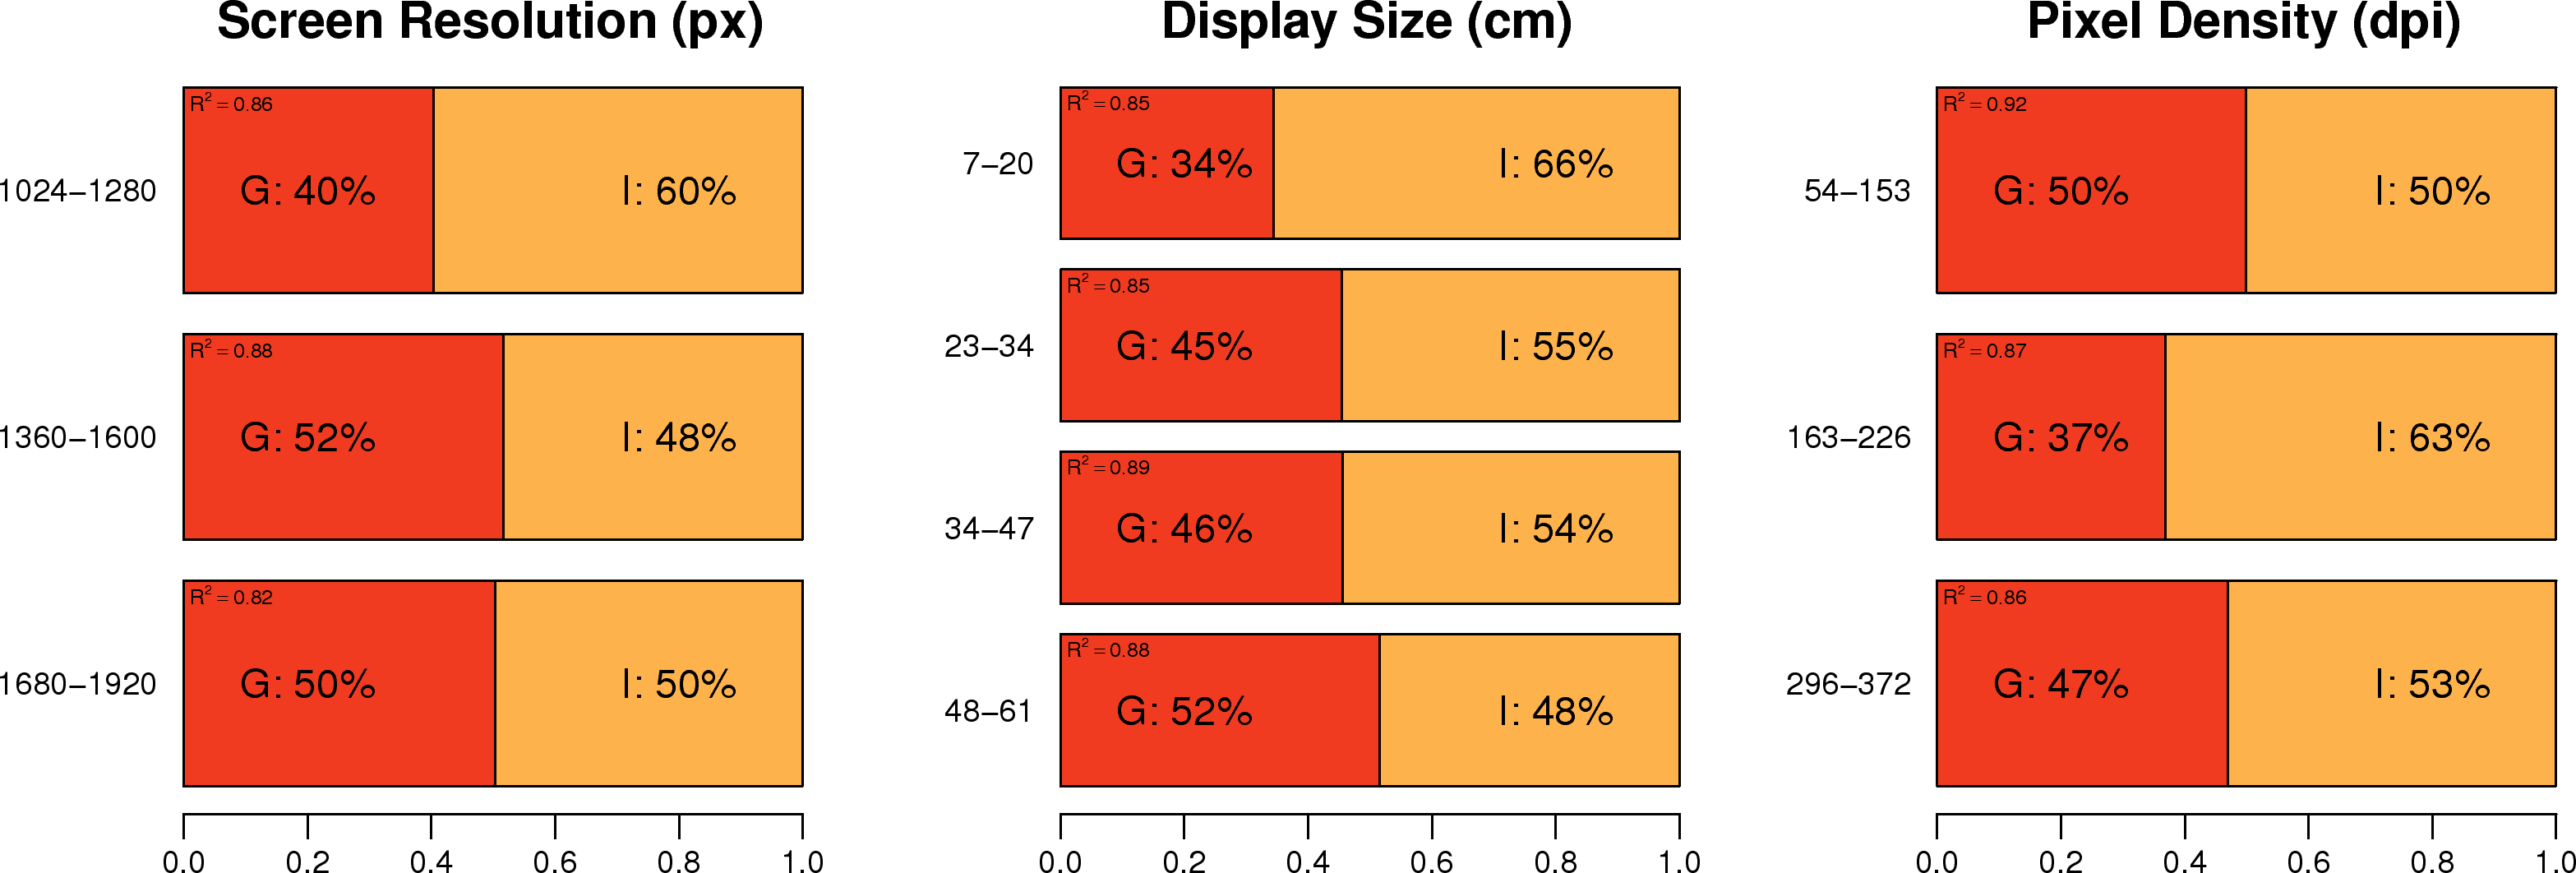 weights_display.png